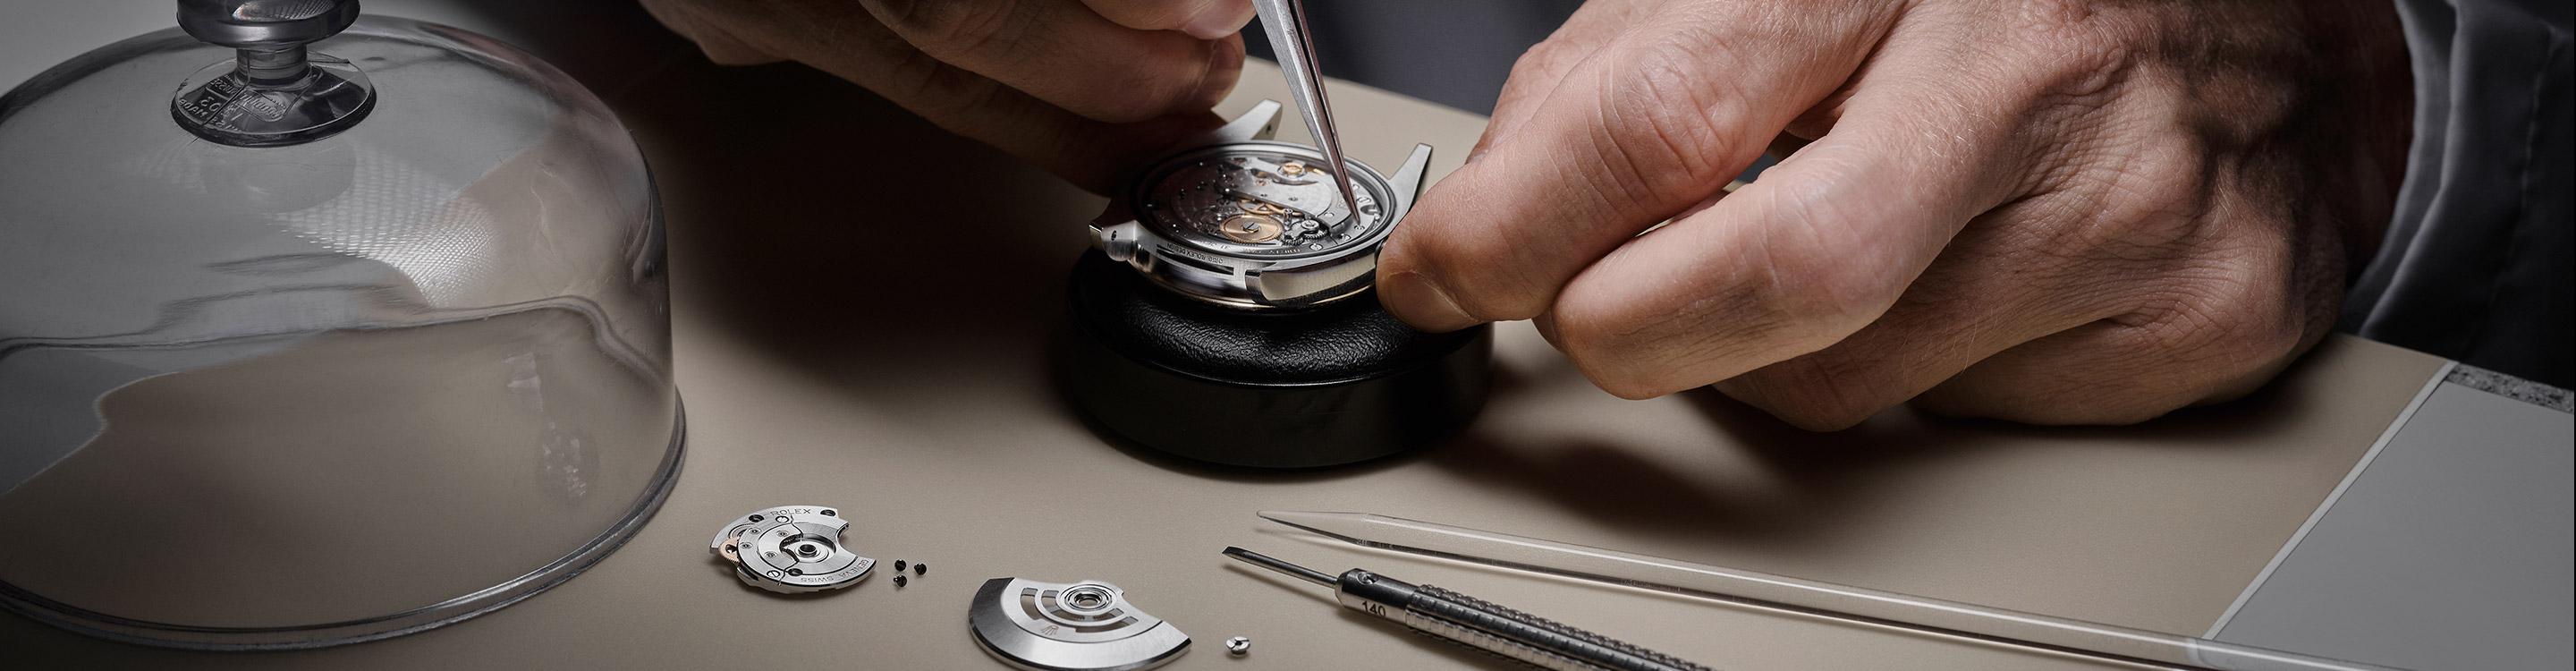 Rolex servicing at Haltom's Fine Jewelers in Forth Worth, TX